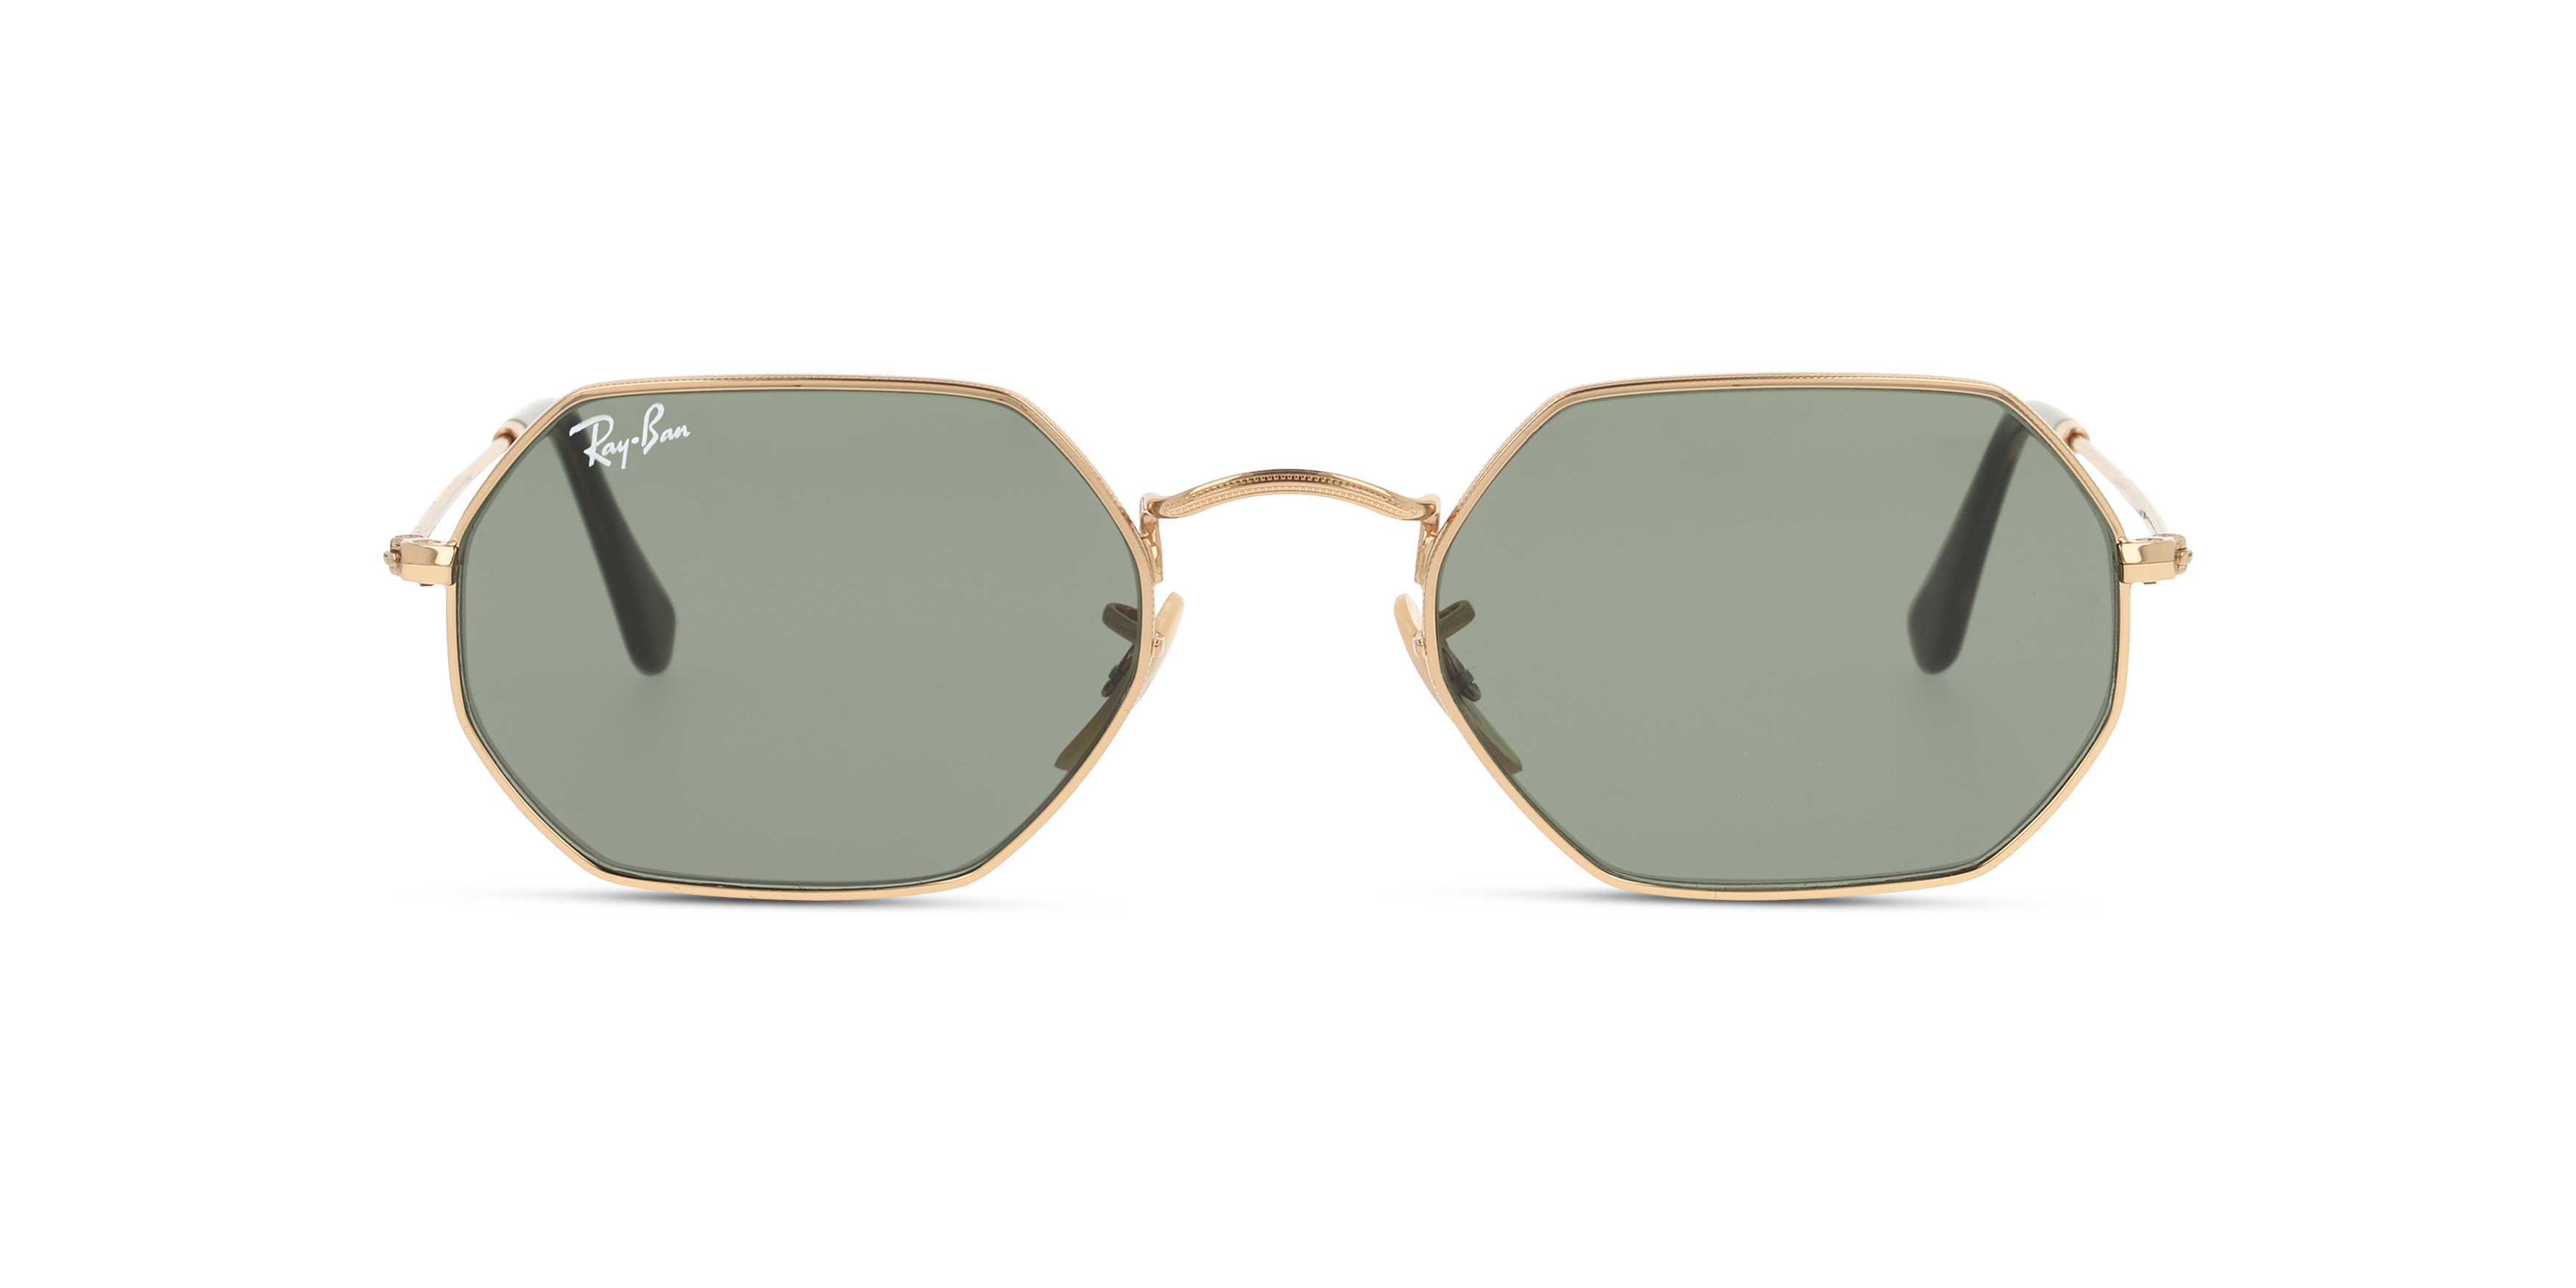 [products.image.front] Ray-Ban Octagonal Classic RB3556N 001